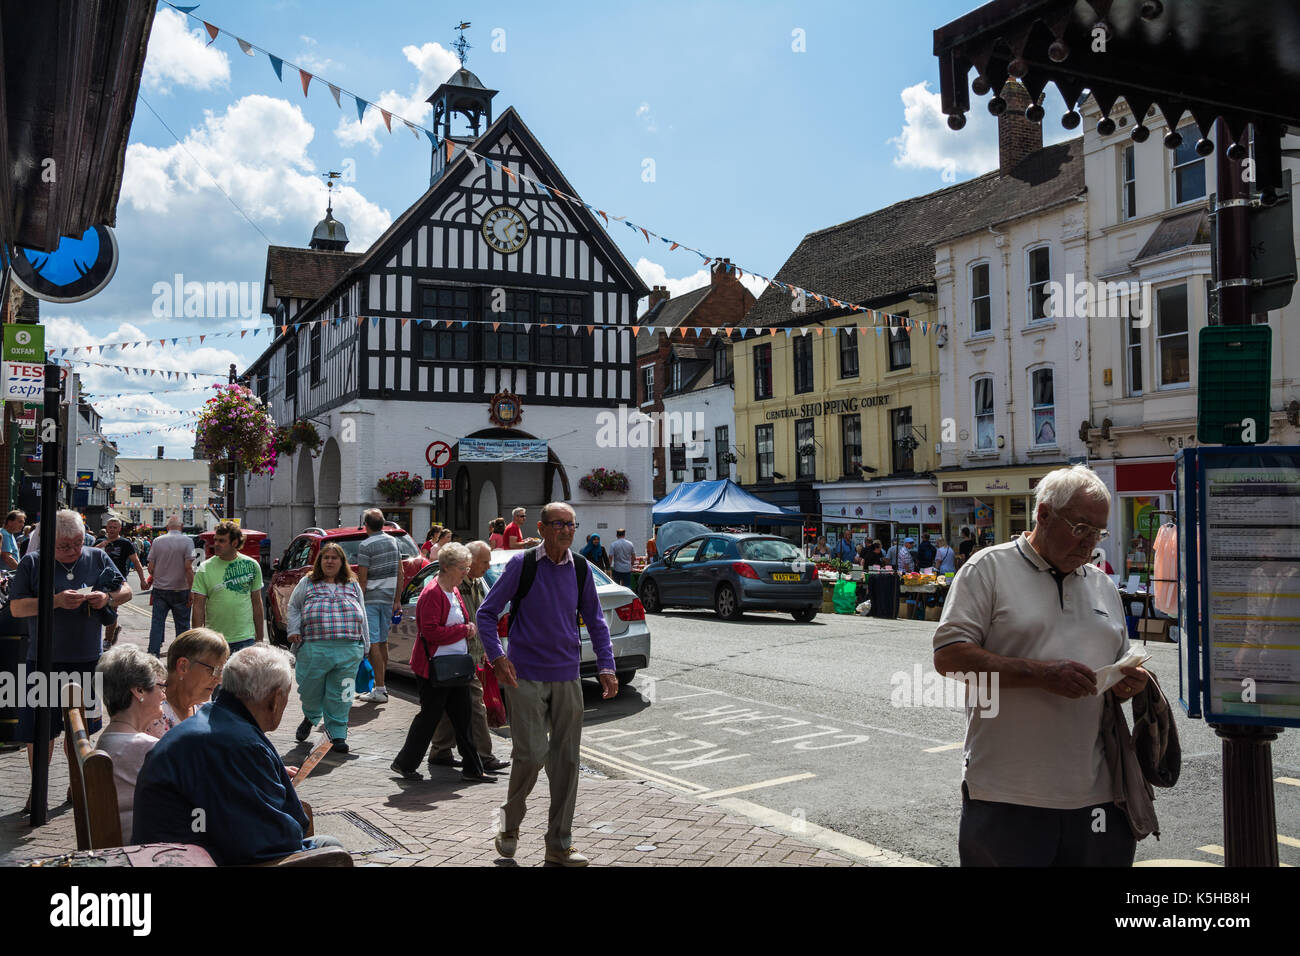 A candid street scene of ordinary people going about their business in High Town, Bridgnorth, Shropshire, UK. Saturday market. Stock Photo